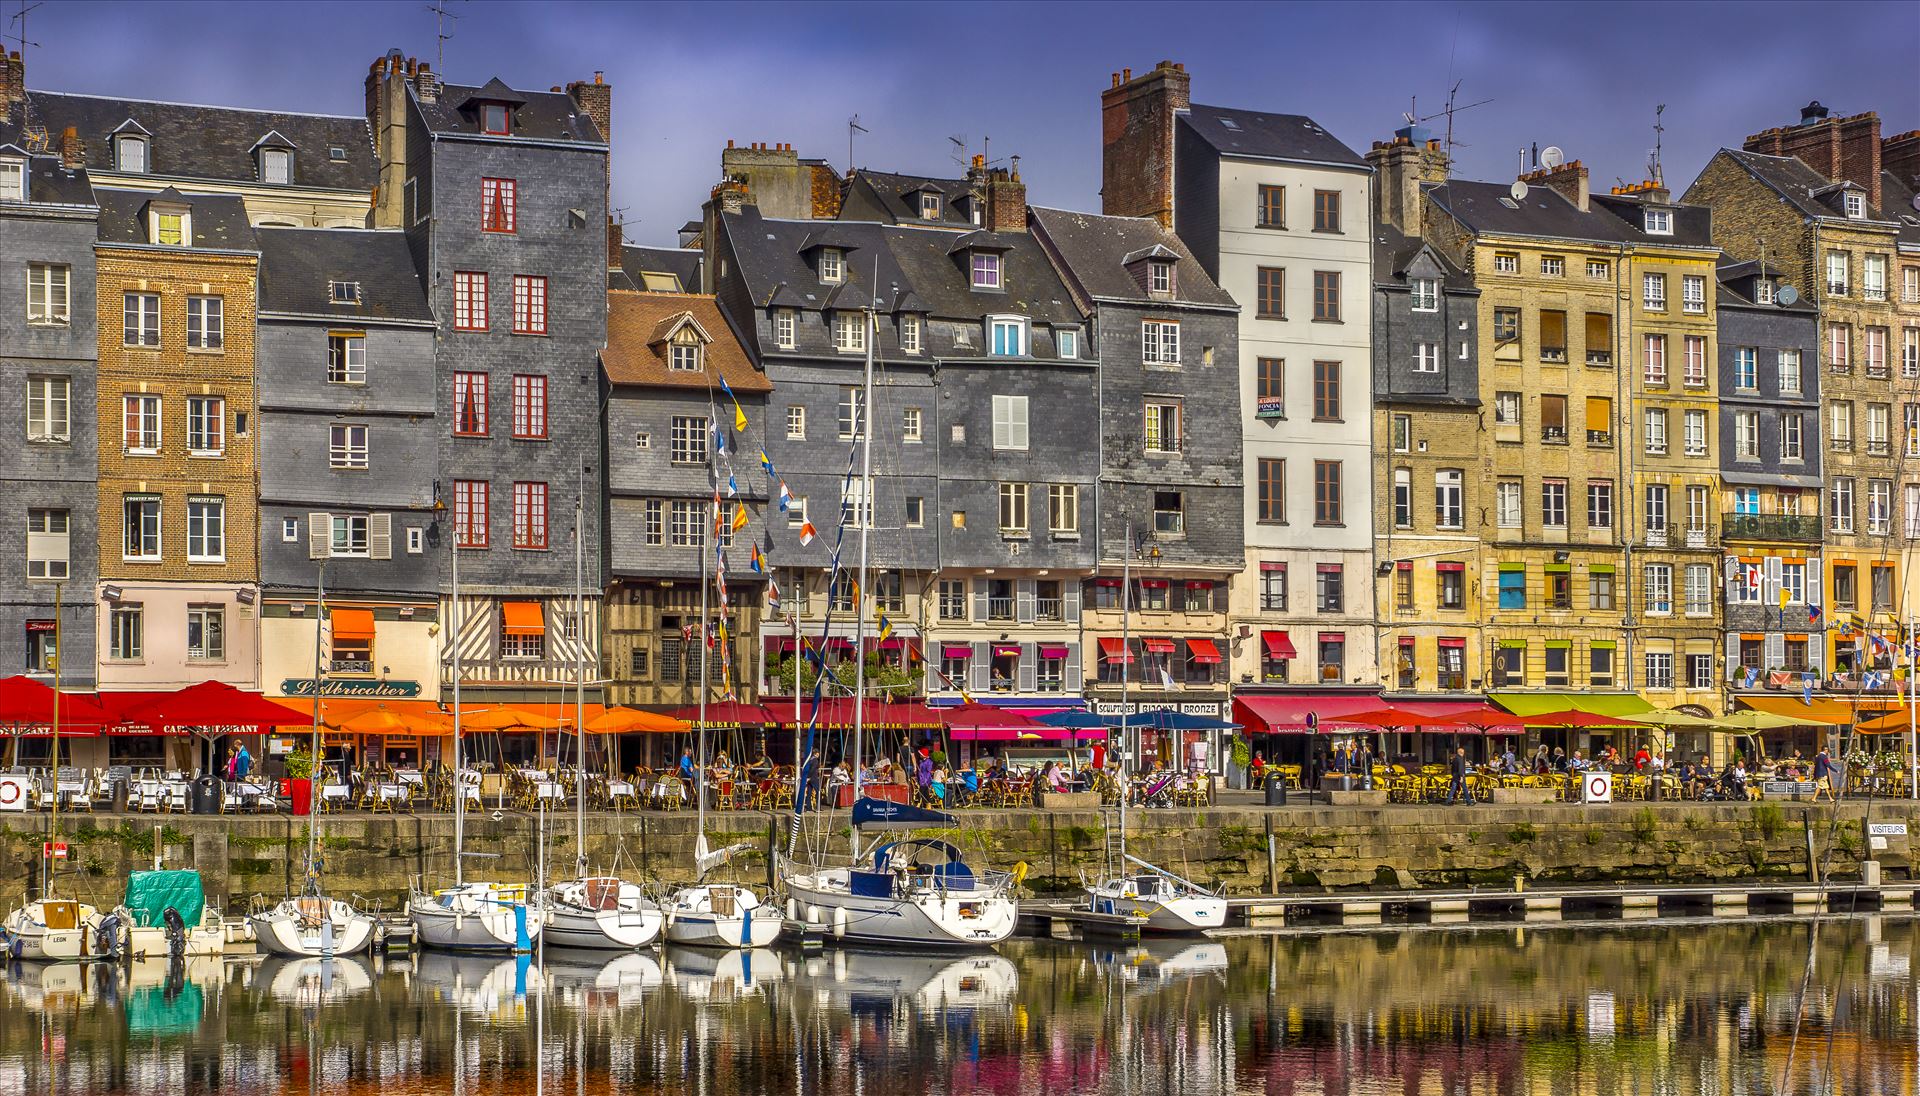 Honfleur, France Ports don’t come any prettier than Honfleur on the Seine’s estuary by Buckmaster